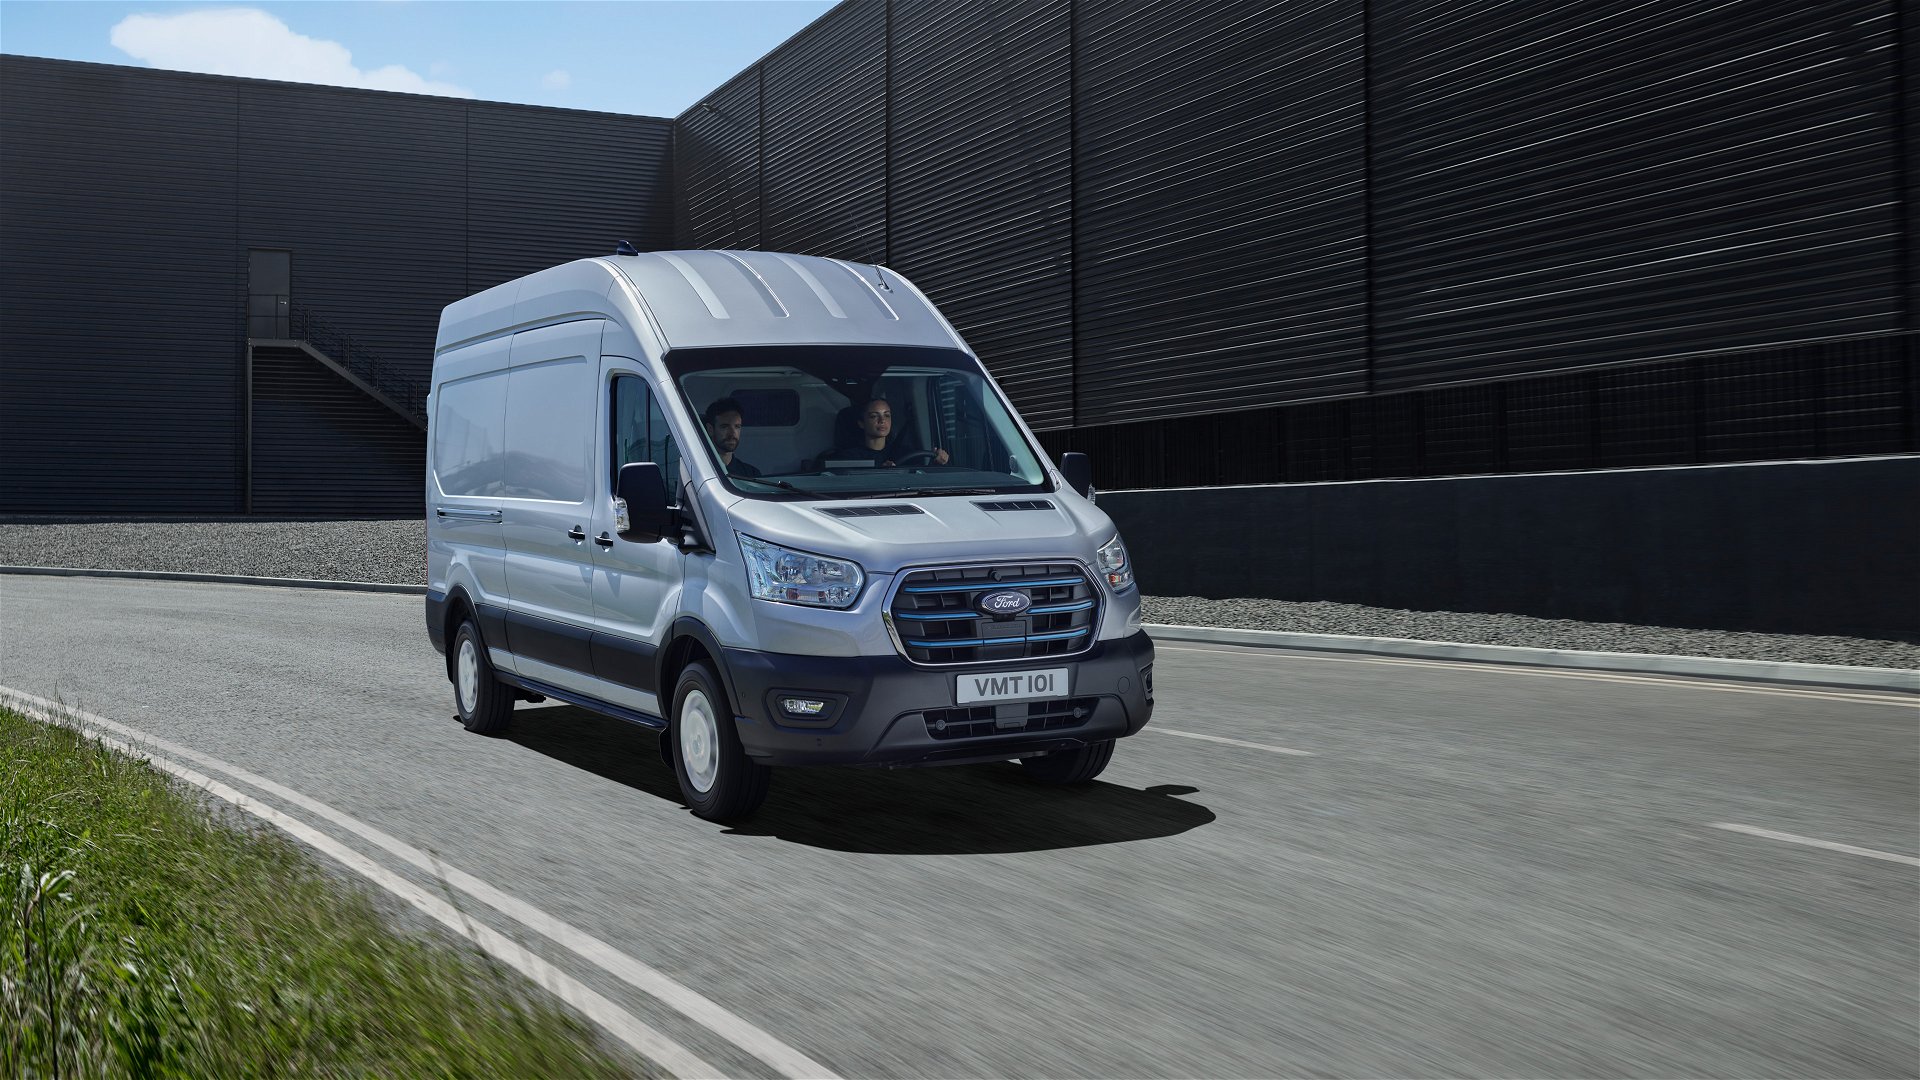 Ford E-Transit electric van in silver